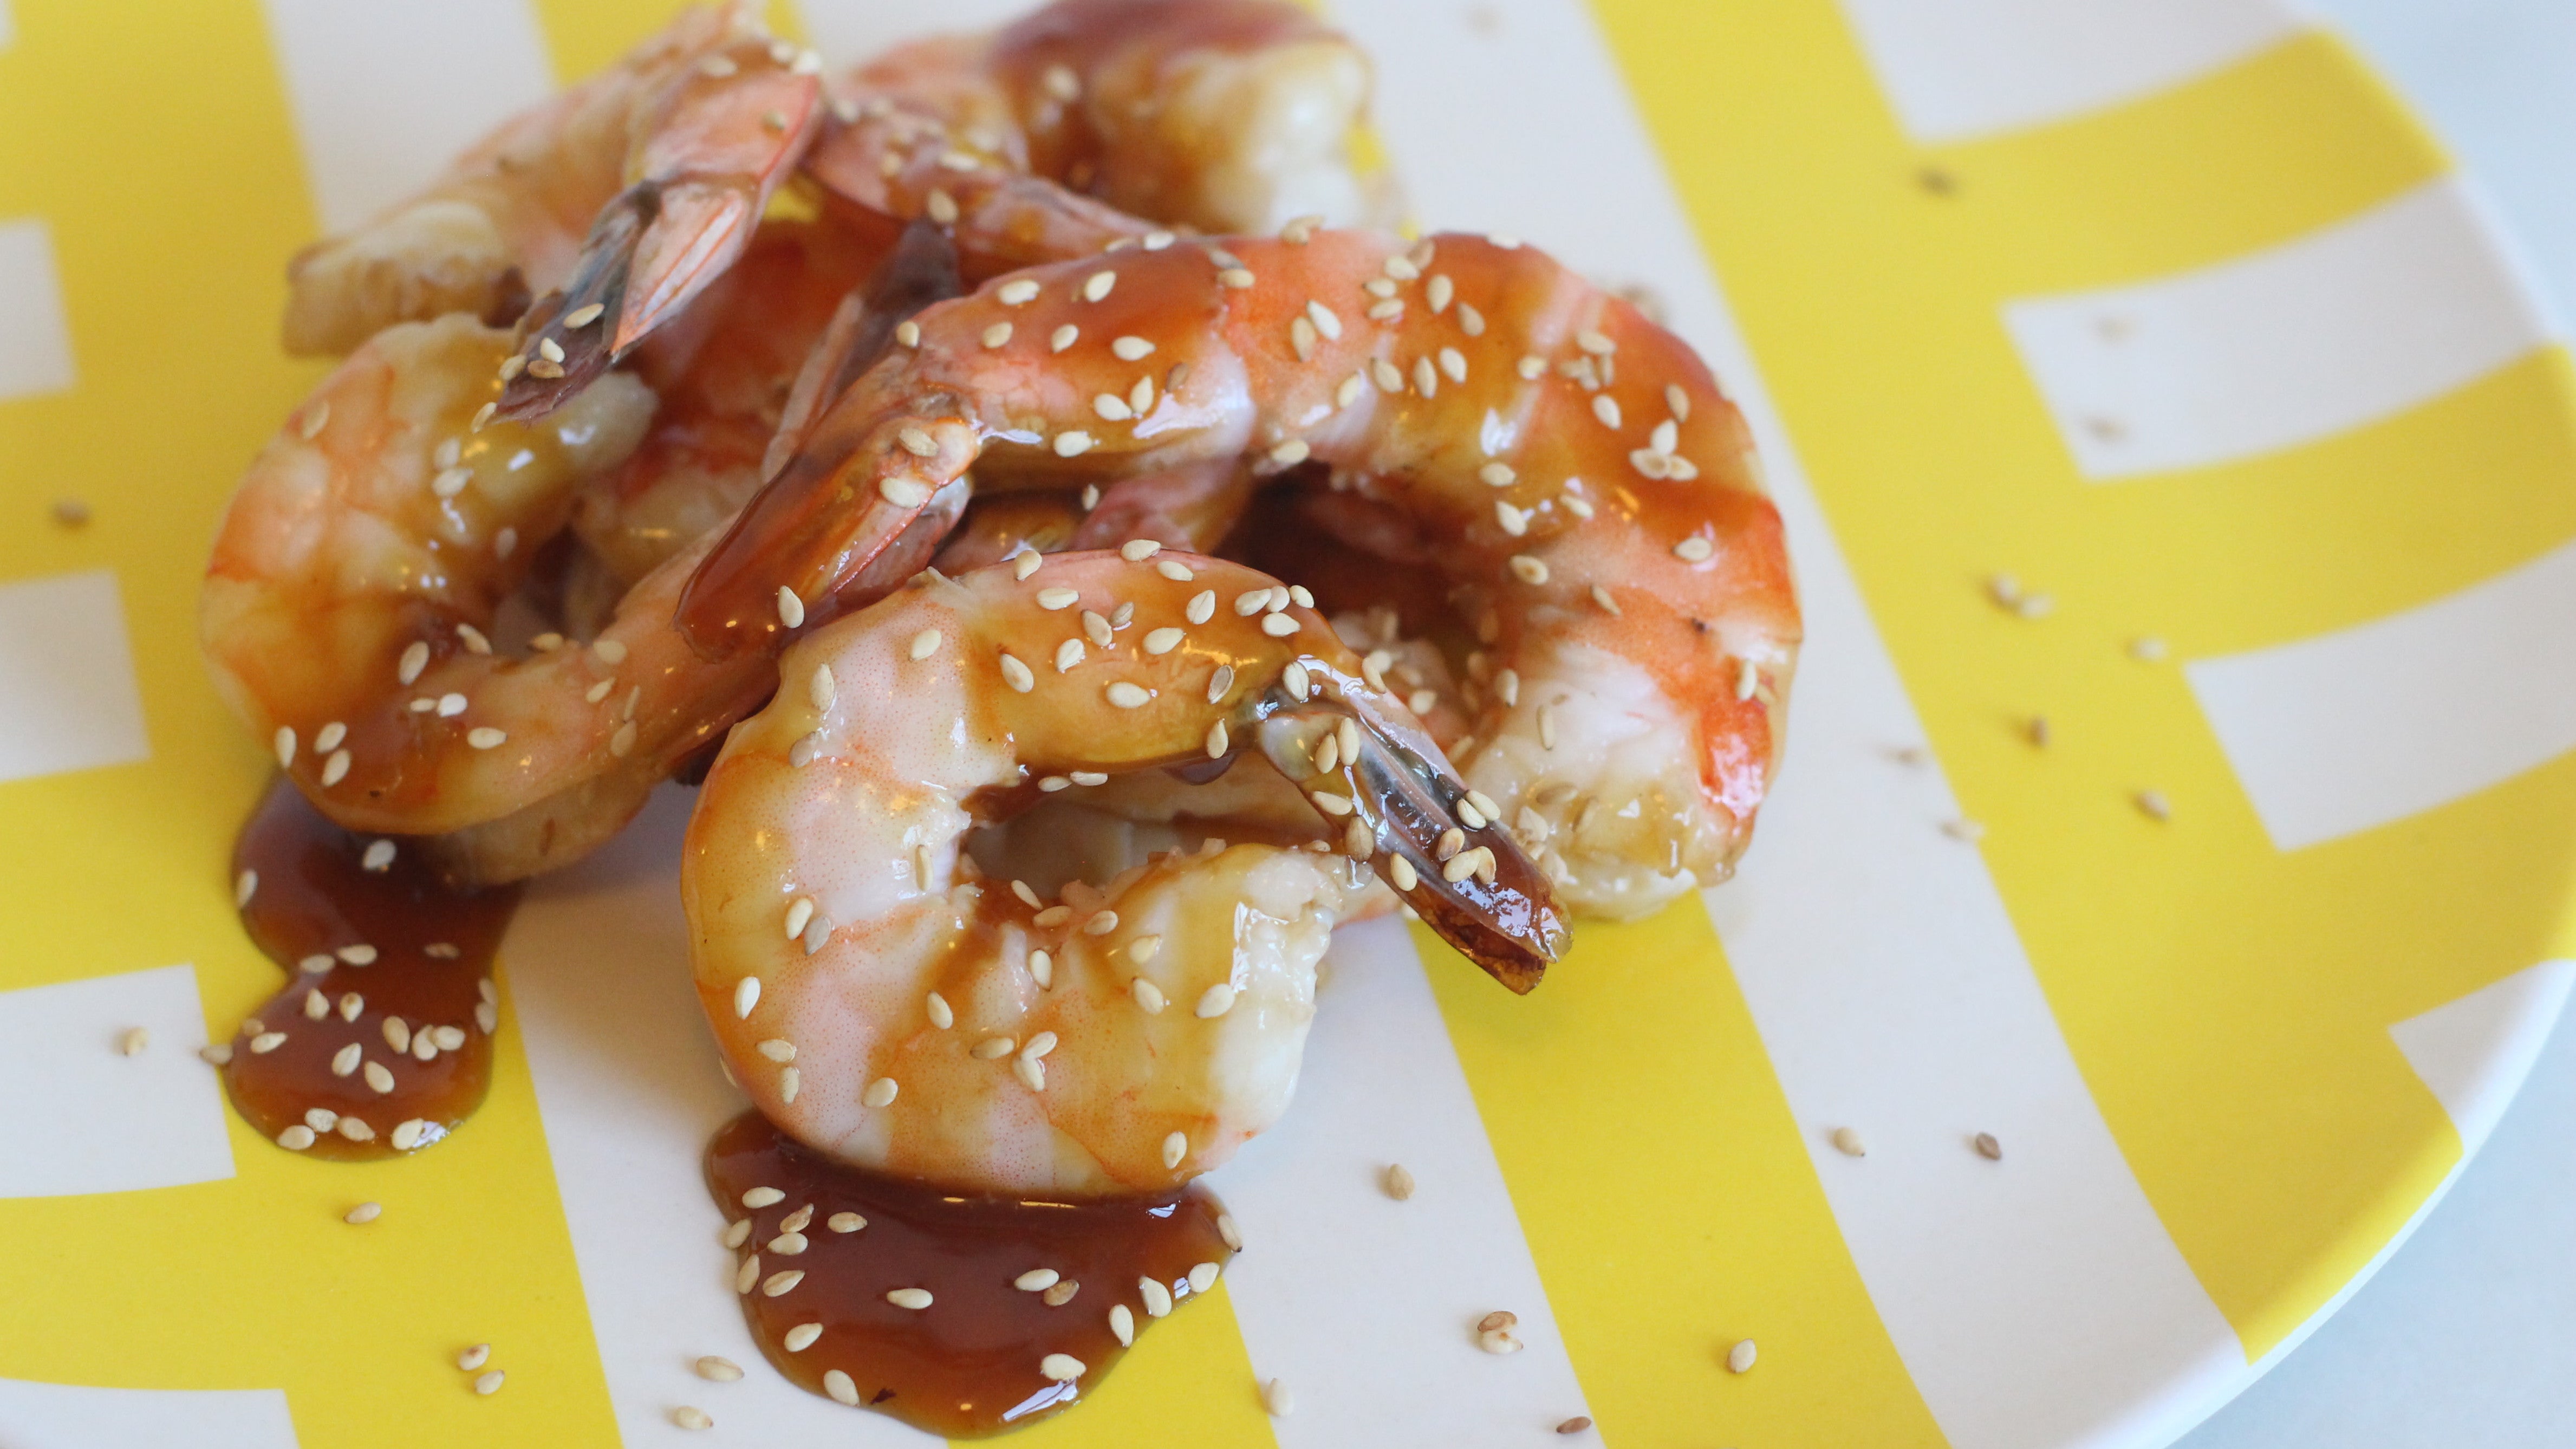 Kombucha Is The Secret To This Sweet And Sour Prawns